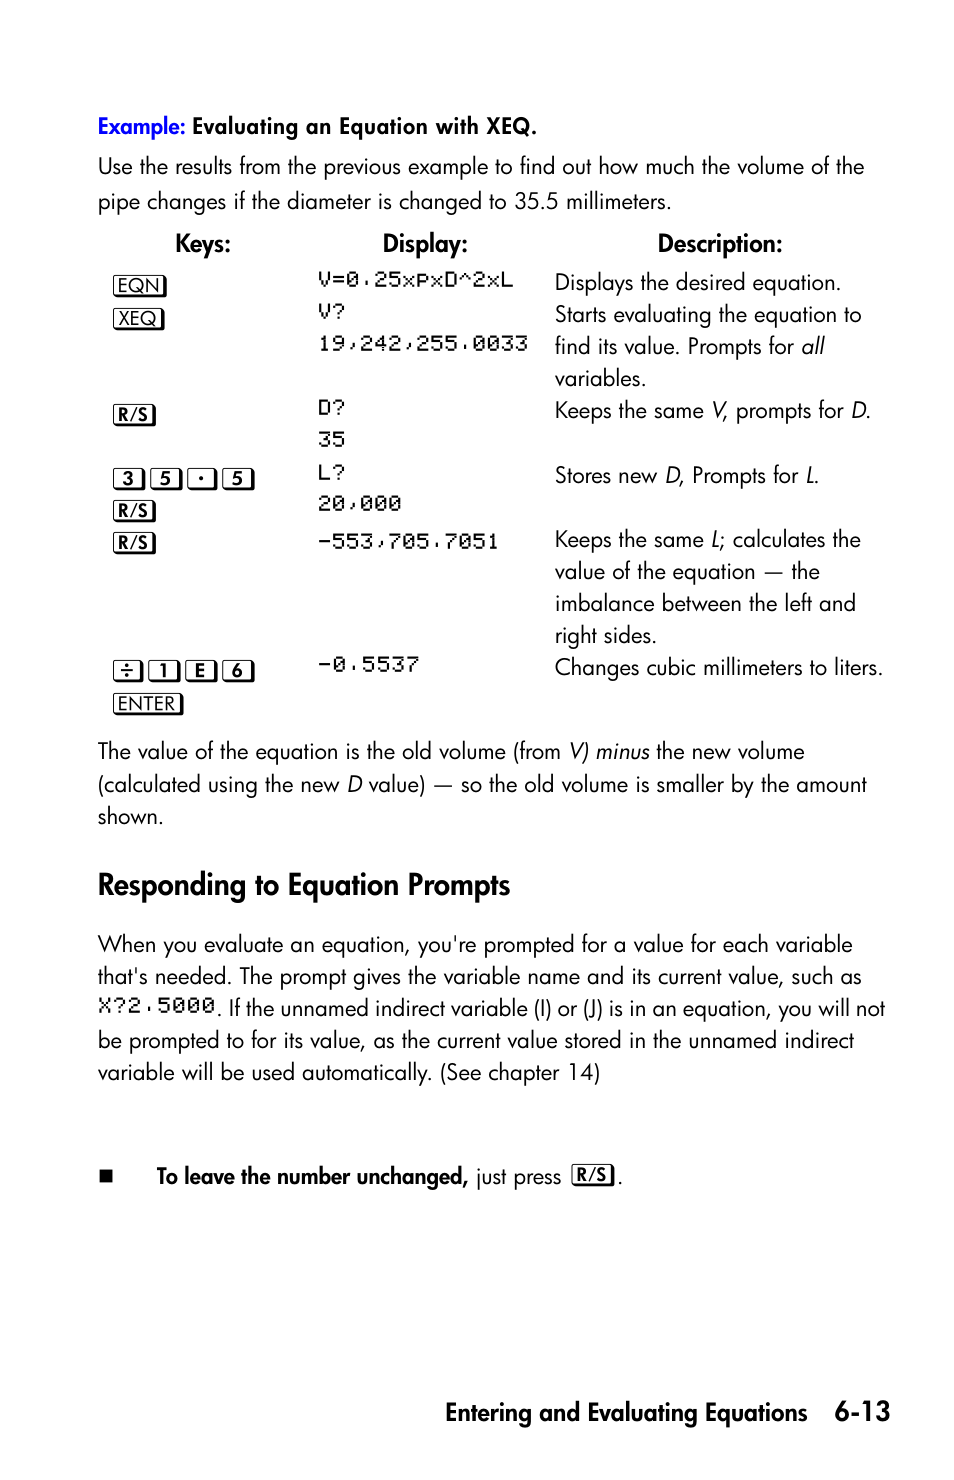 Responding to equation prompts | HP 35s Scientific Calculator User Manual | Page 115 / 382